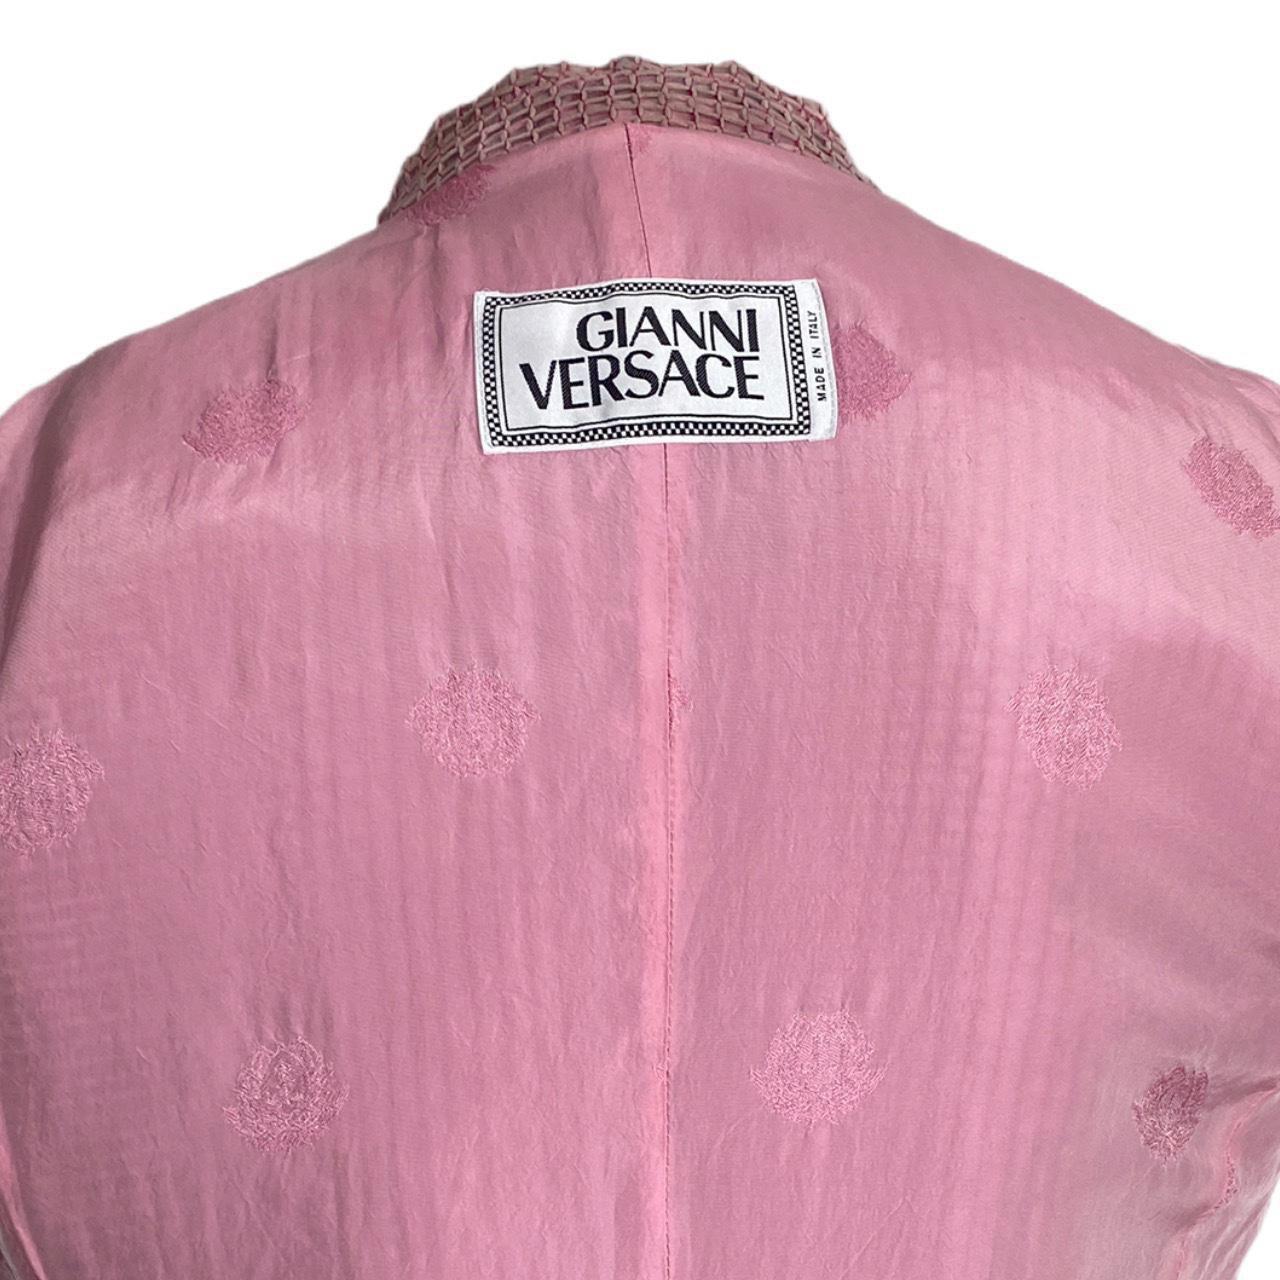 Gianni Versace Suit   Pink Jacket Skirt Set 1990's For Sale 3